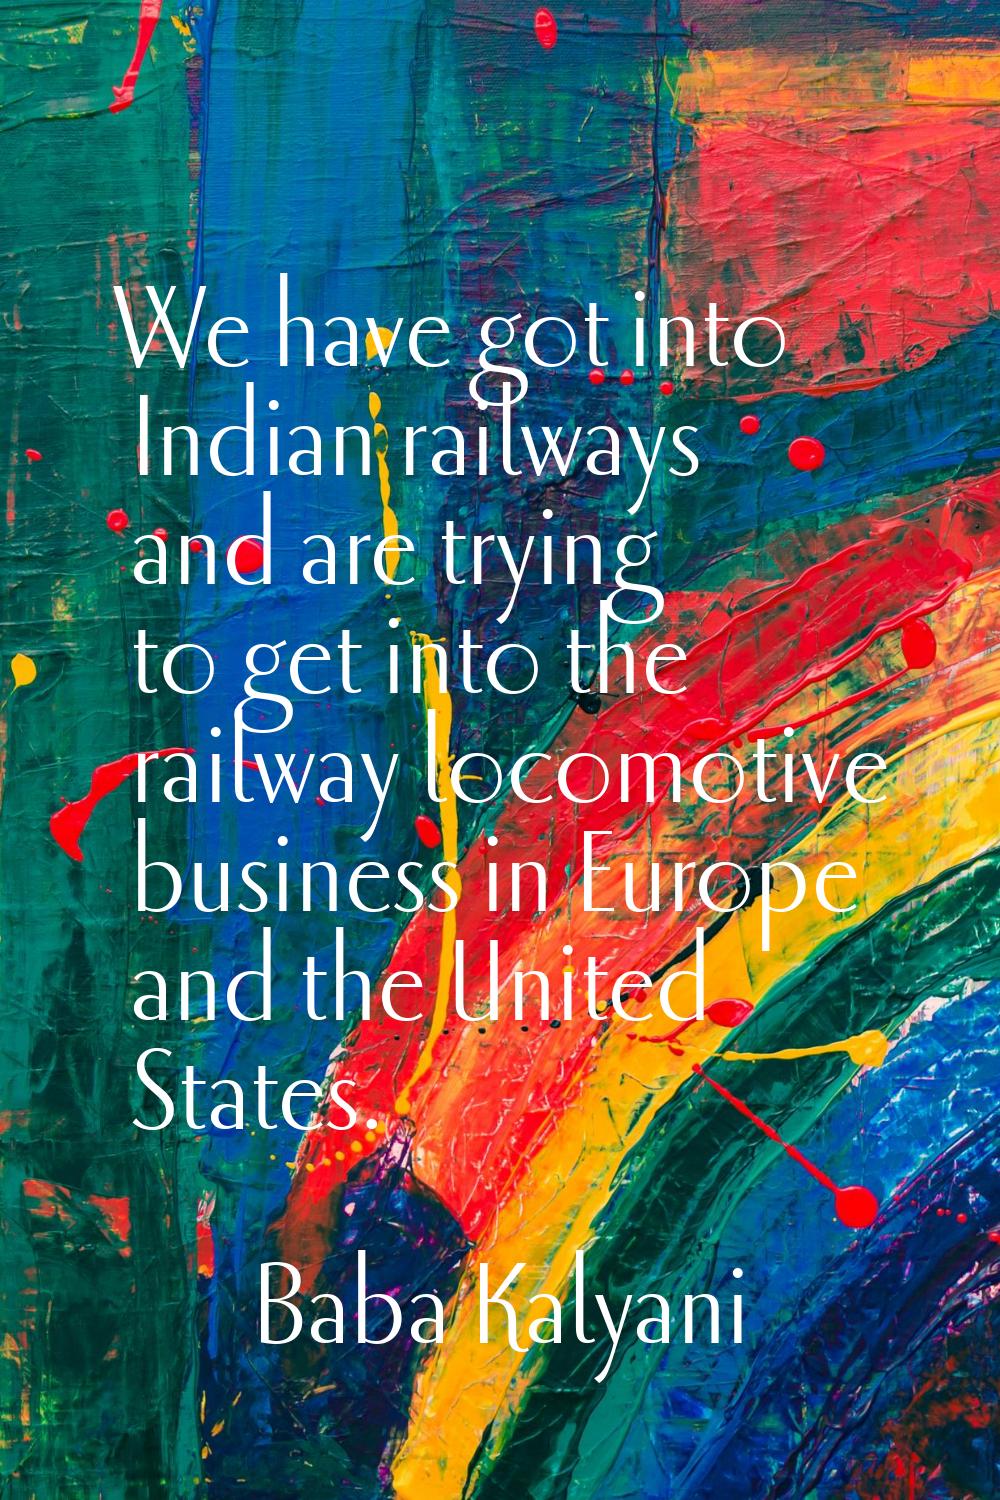 We have got into Indian railways and are trying to get into the railway locomotive business in Euro